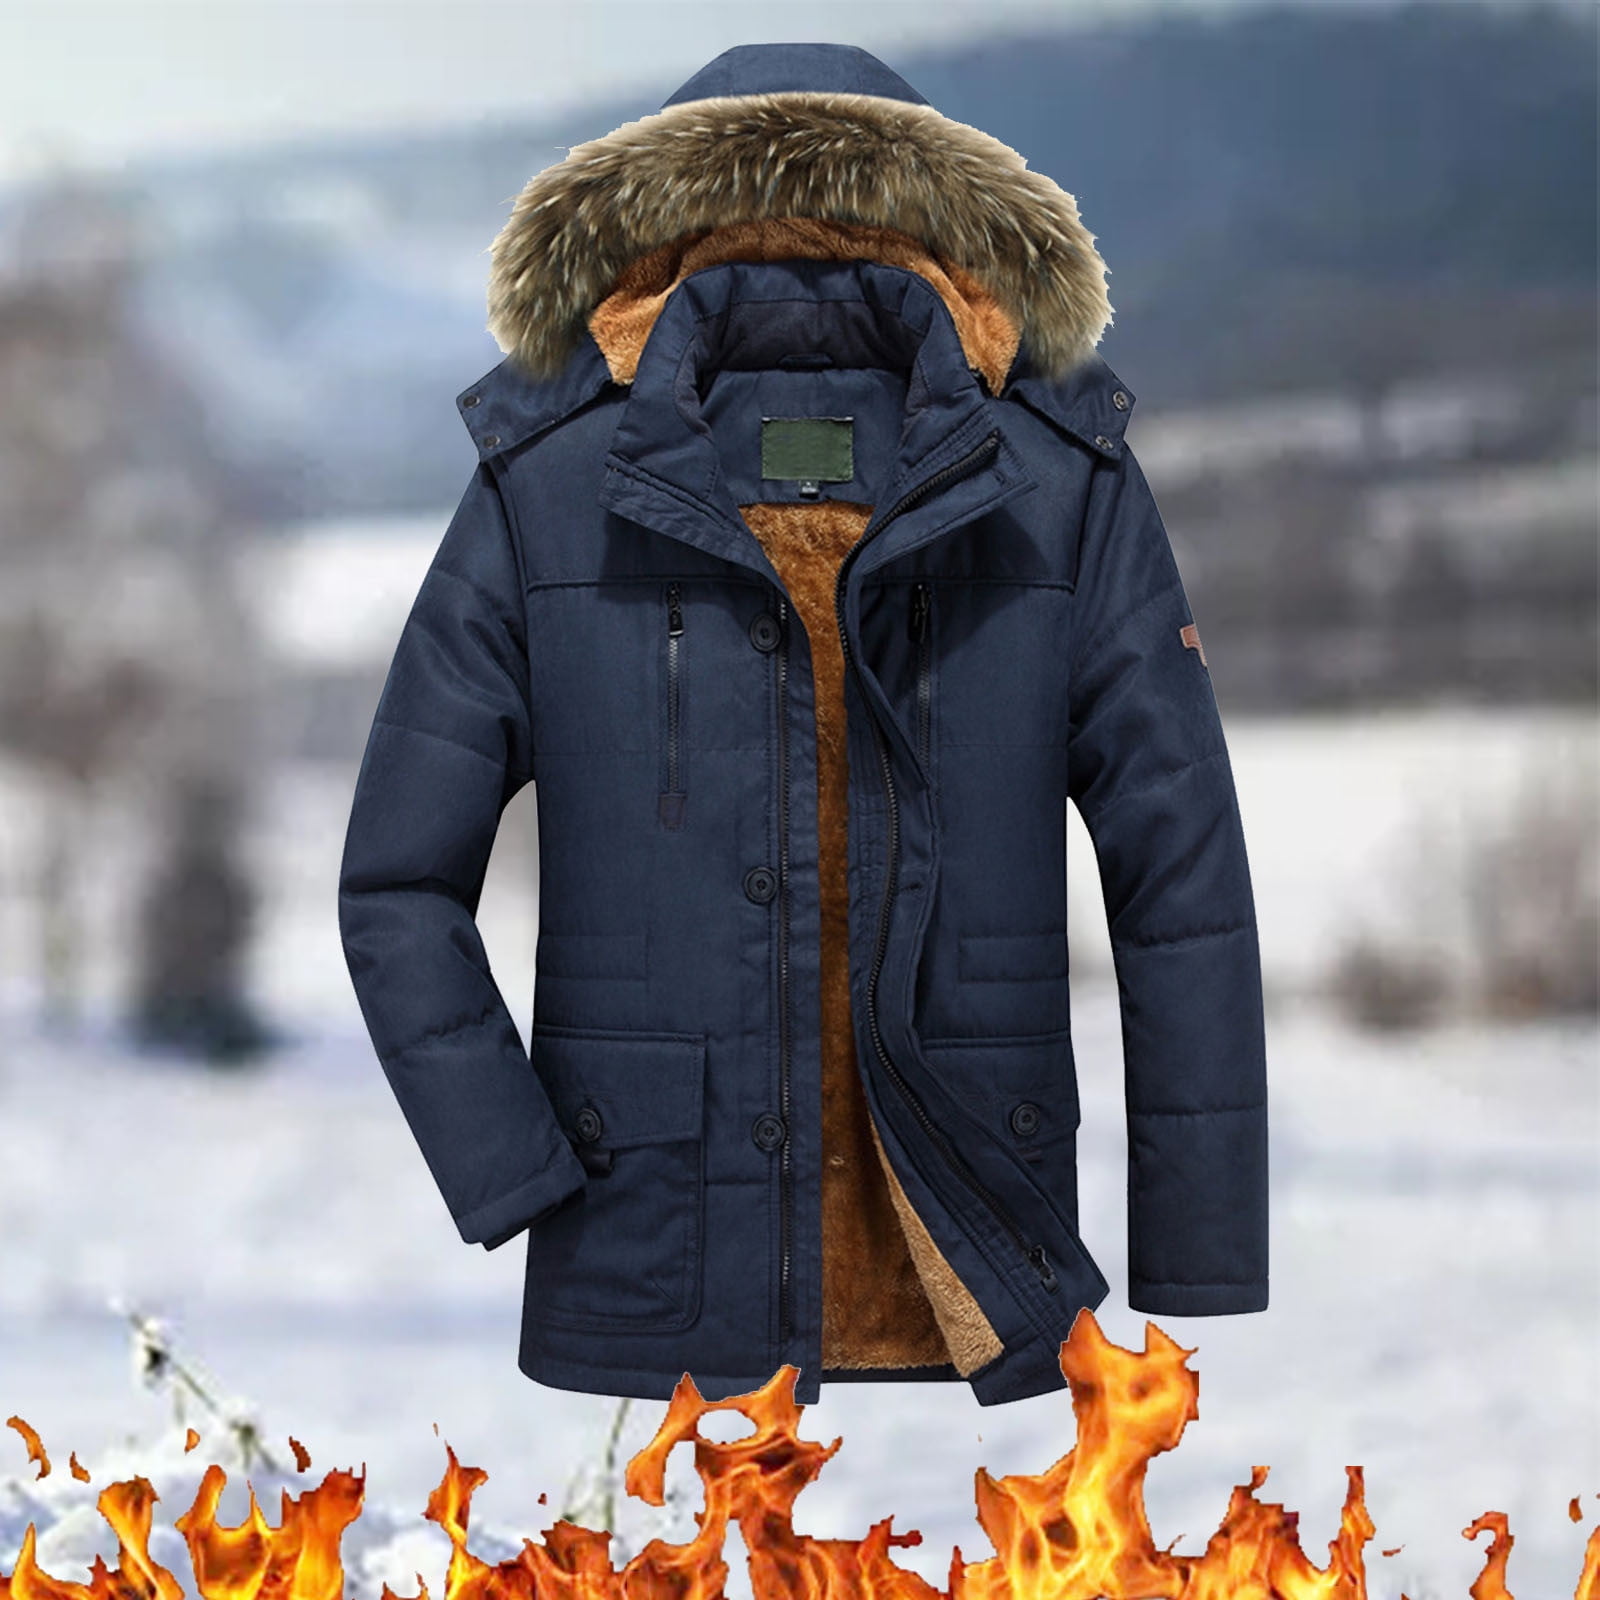 LEEy-world Mens Winter Coats With Hood Authentics Men's Long Sleeve Quilted  Lined Flannel Shirt Jacket with Hood Dark Blue,3XL